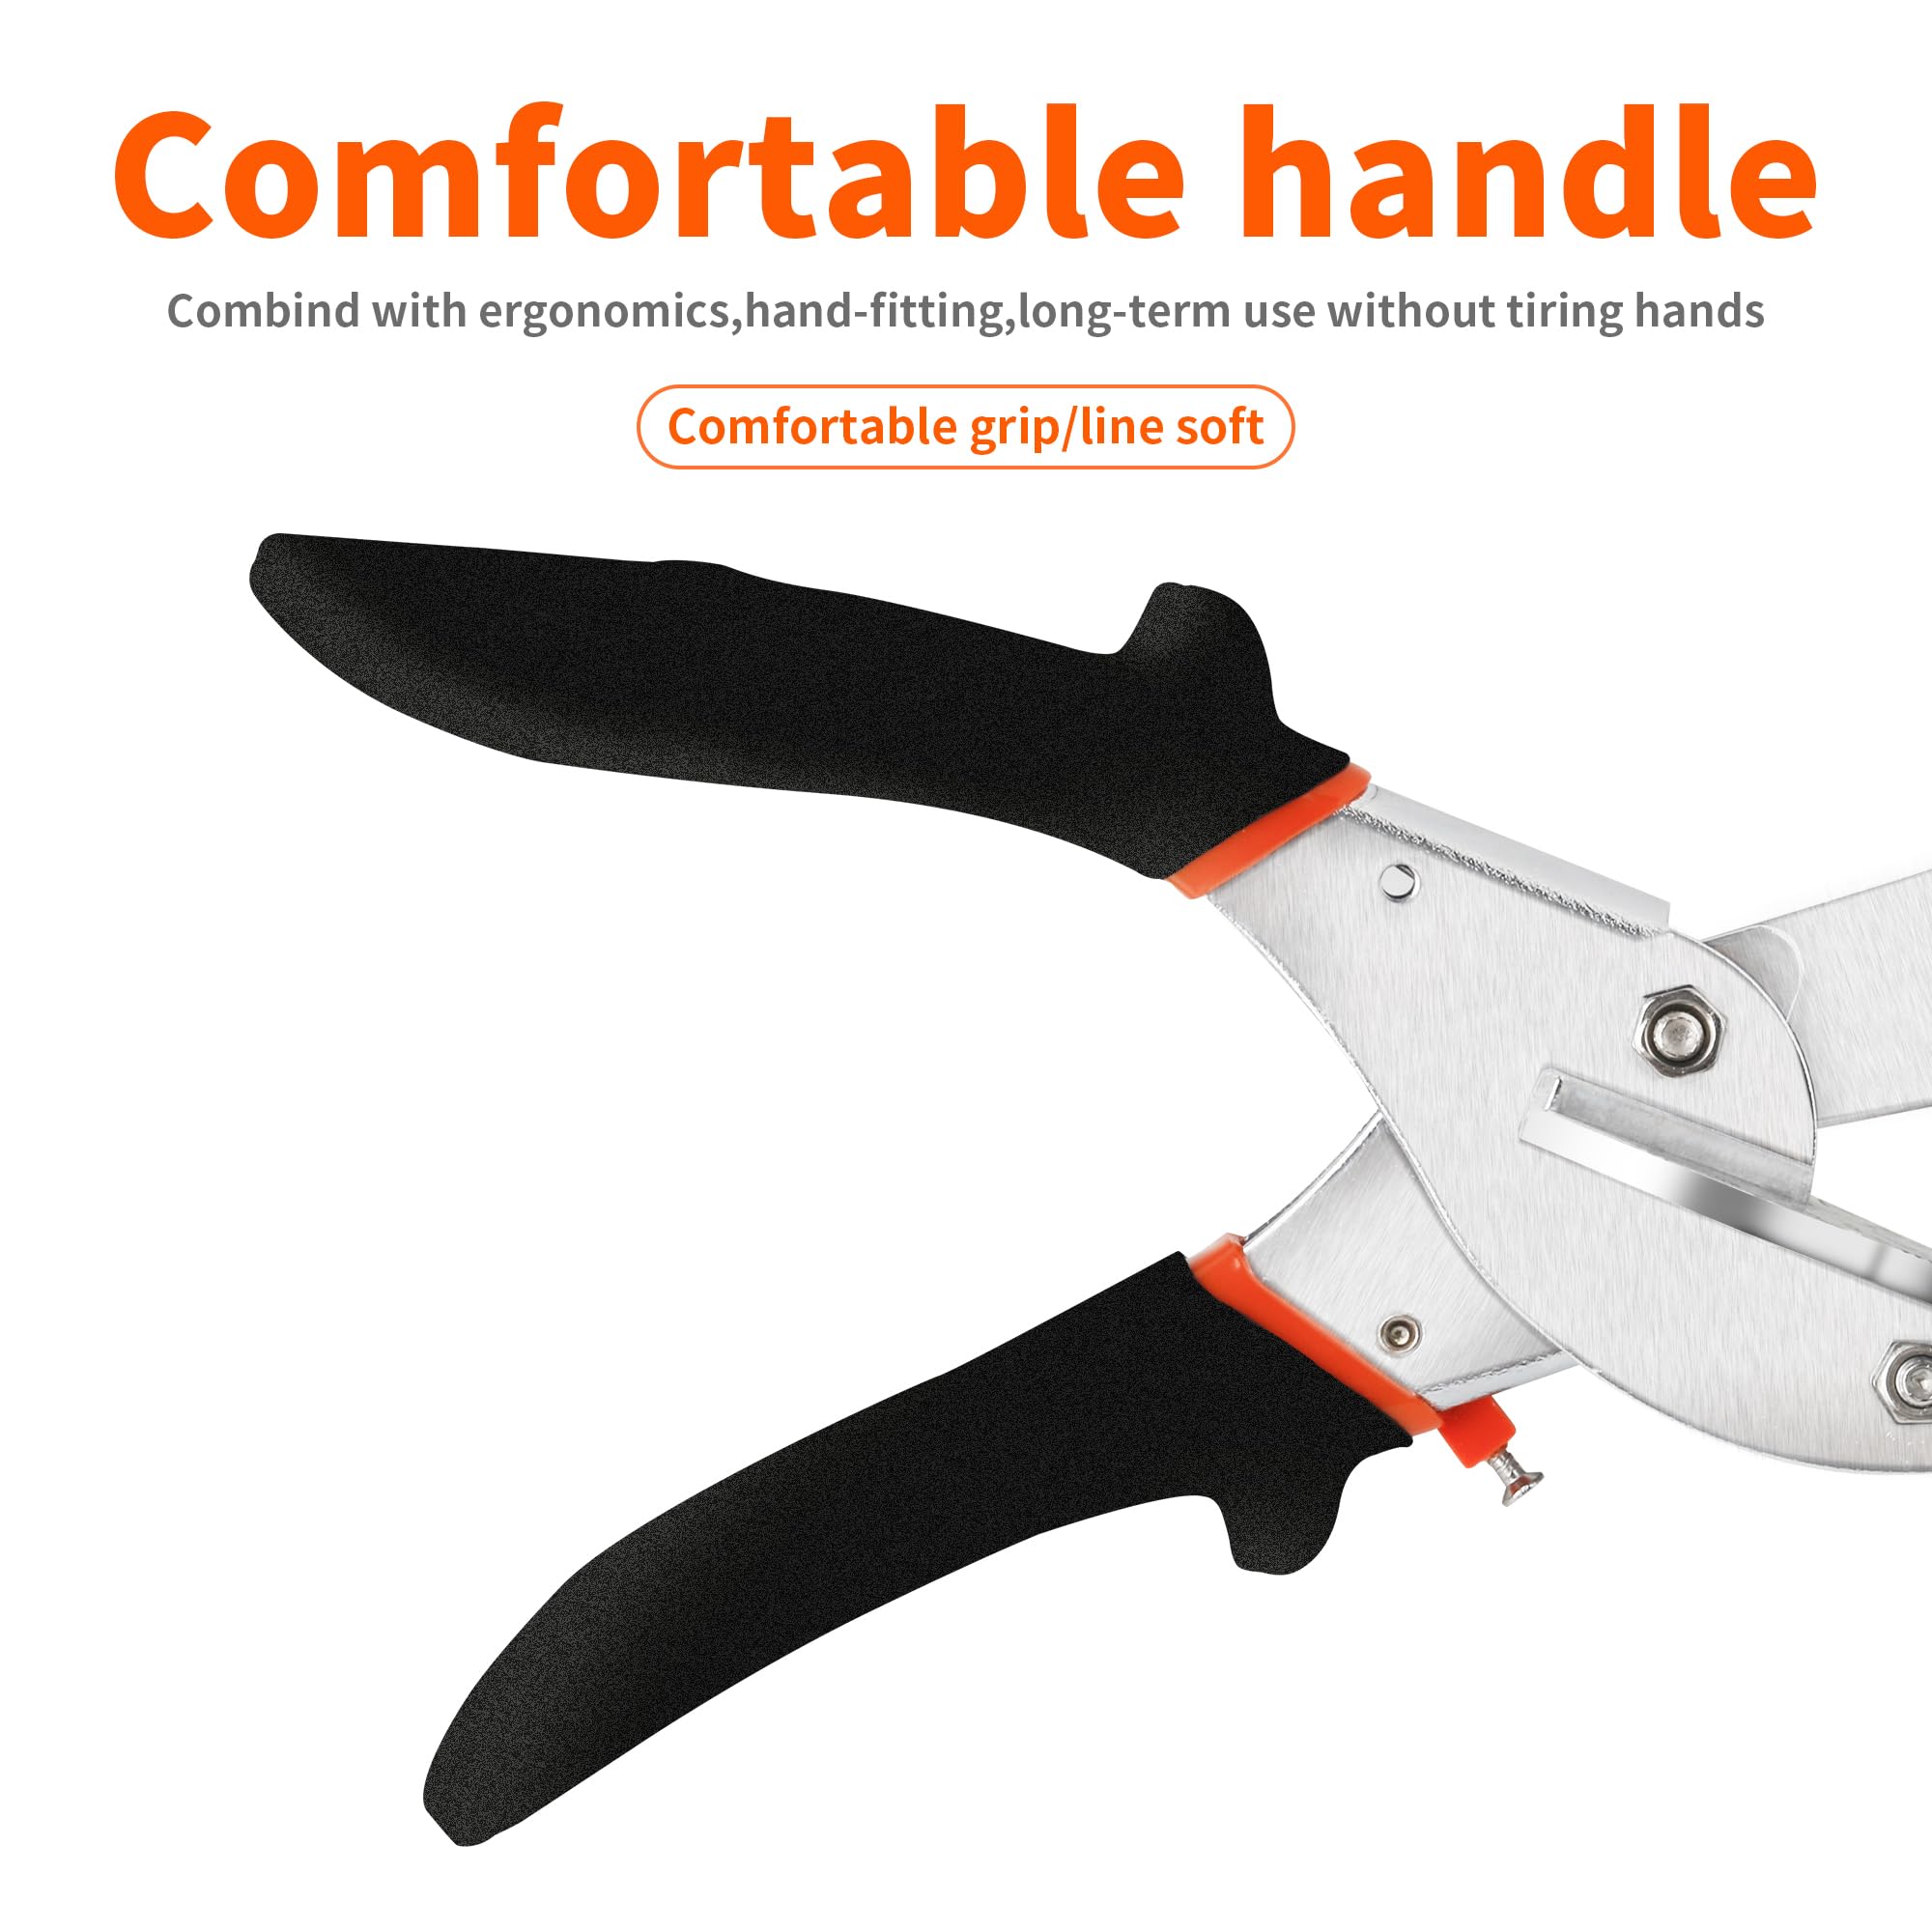 GARTOL Multifunctional Trunking/Miter Shears for Angular Cutting of Moulding and Trim, Adjustable at 45 To 135 Degree, Hand Tools for Cutting Soft Wood, Plastic, PVC, with Replacement blades